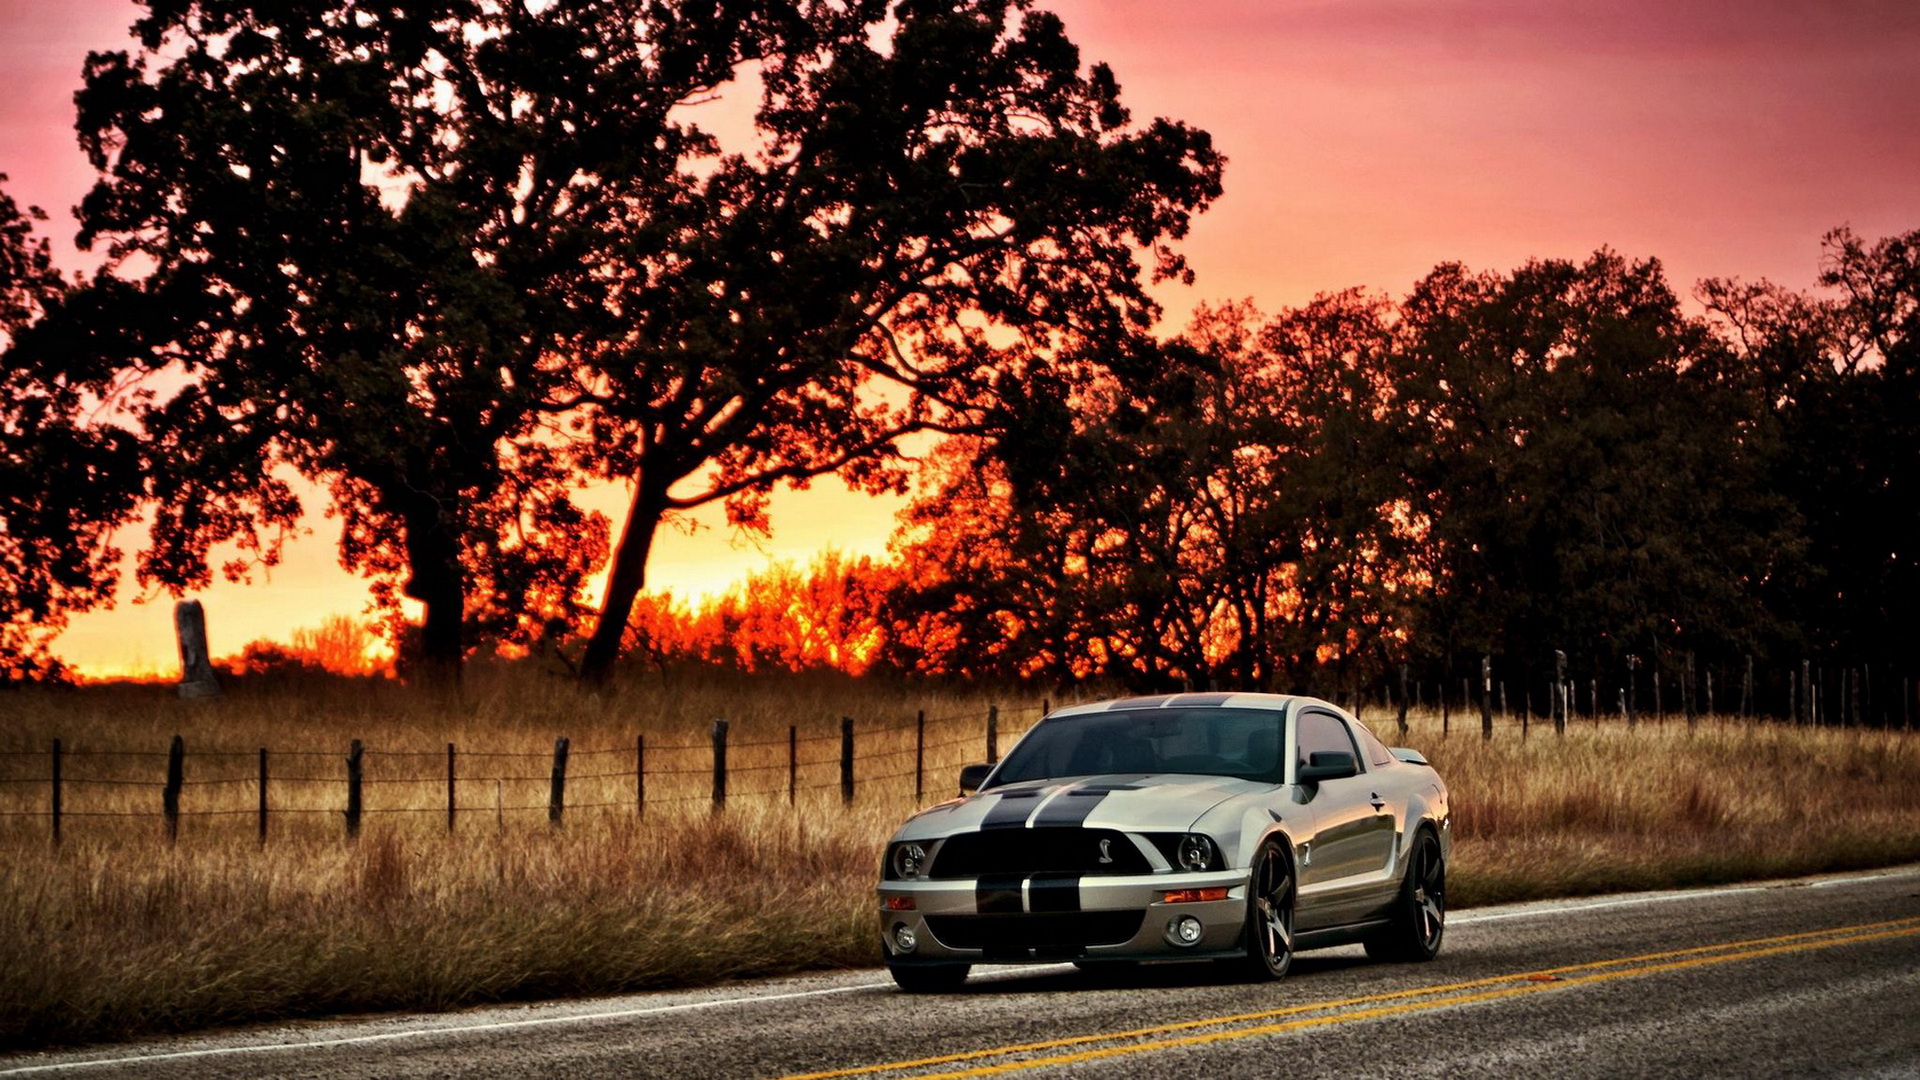 Vehicles Ford Mustang Shelby 1920x1080